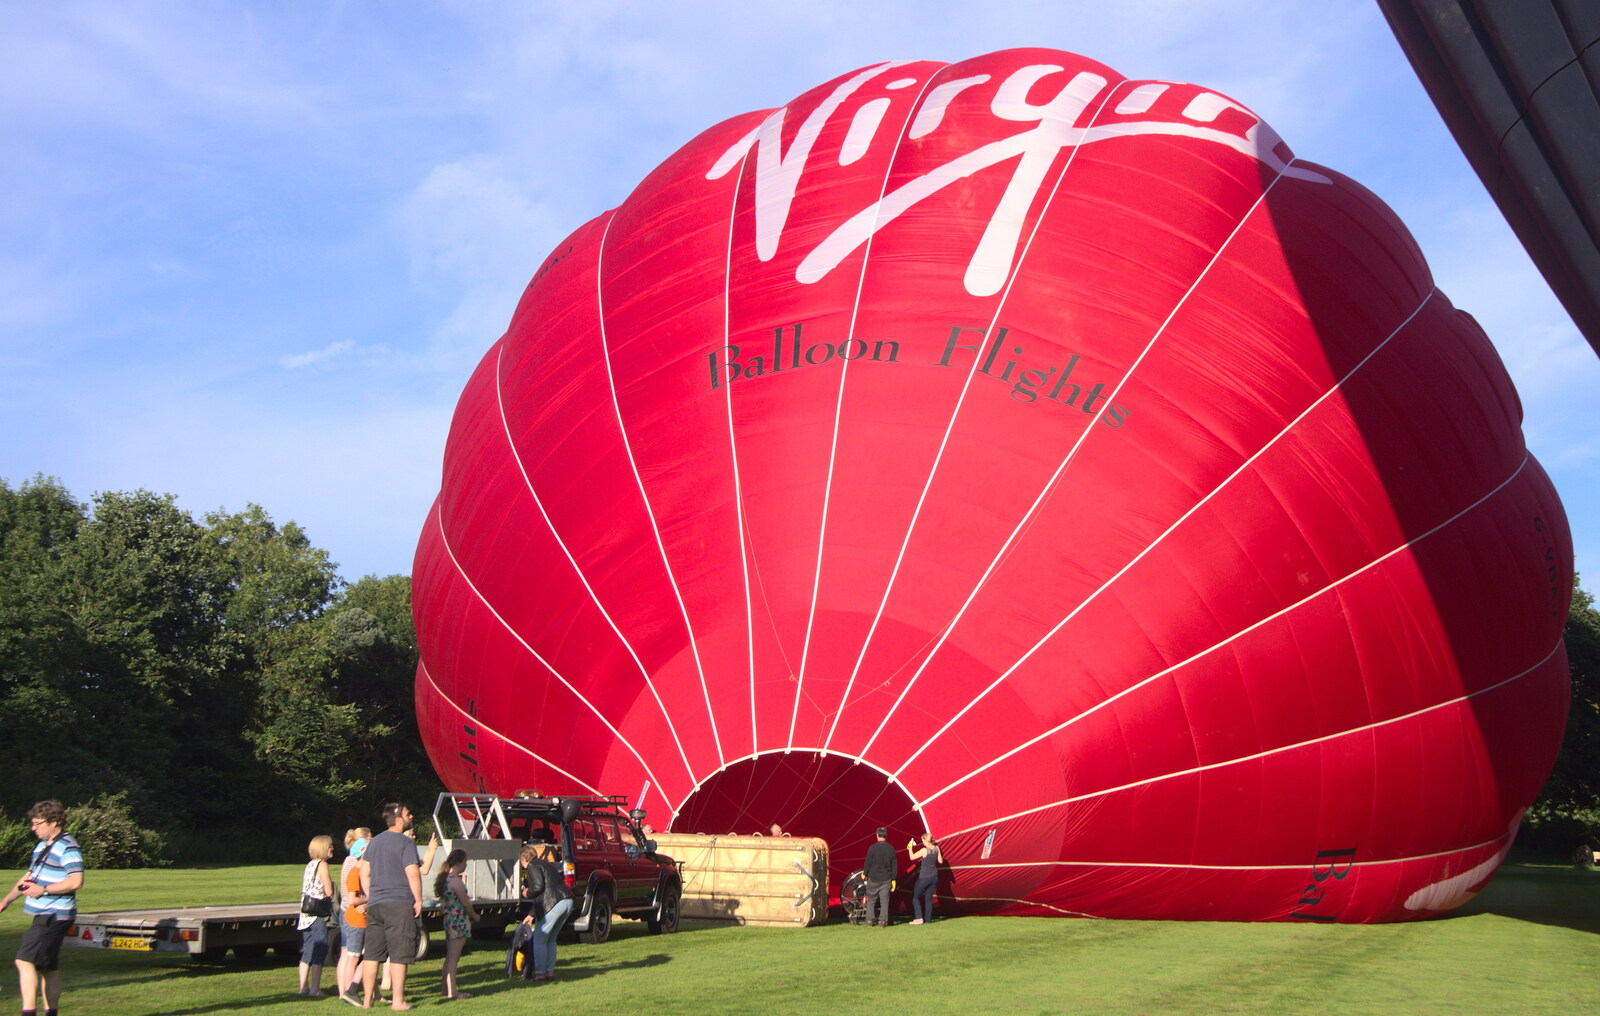 A Virgin balloon inflates from Fred's Camping, Curry and the Closing of B&Q, Thetford, Diss  and Ipswich - 16th July 2016